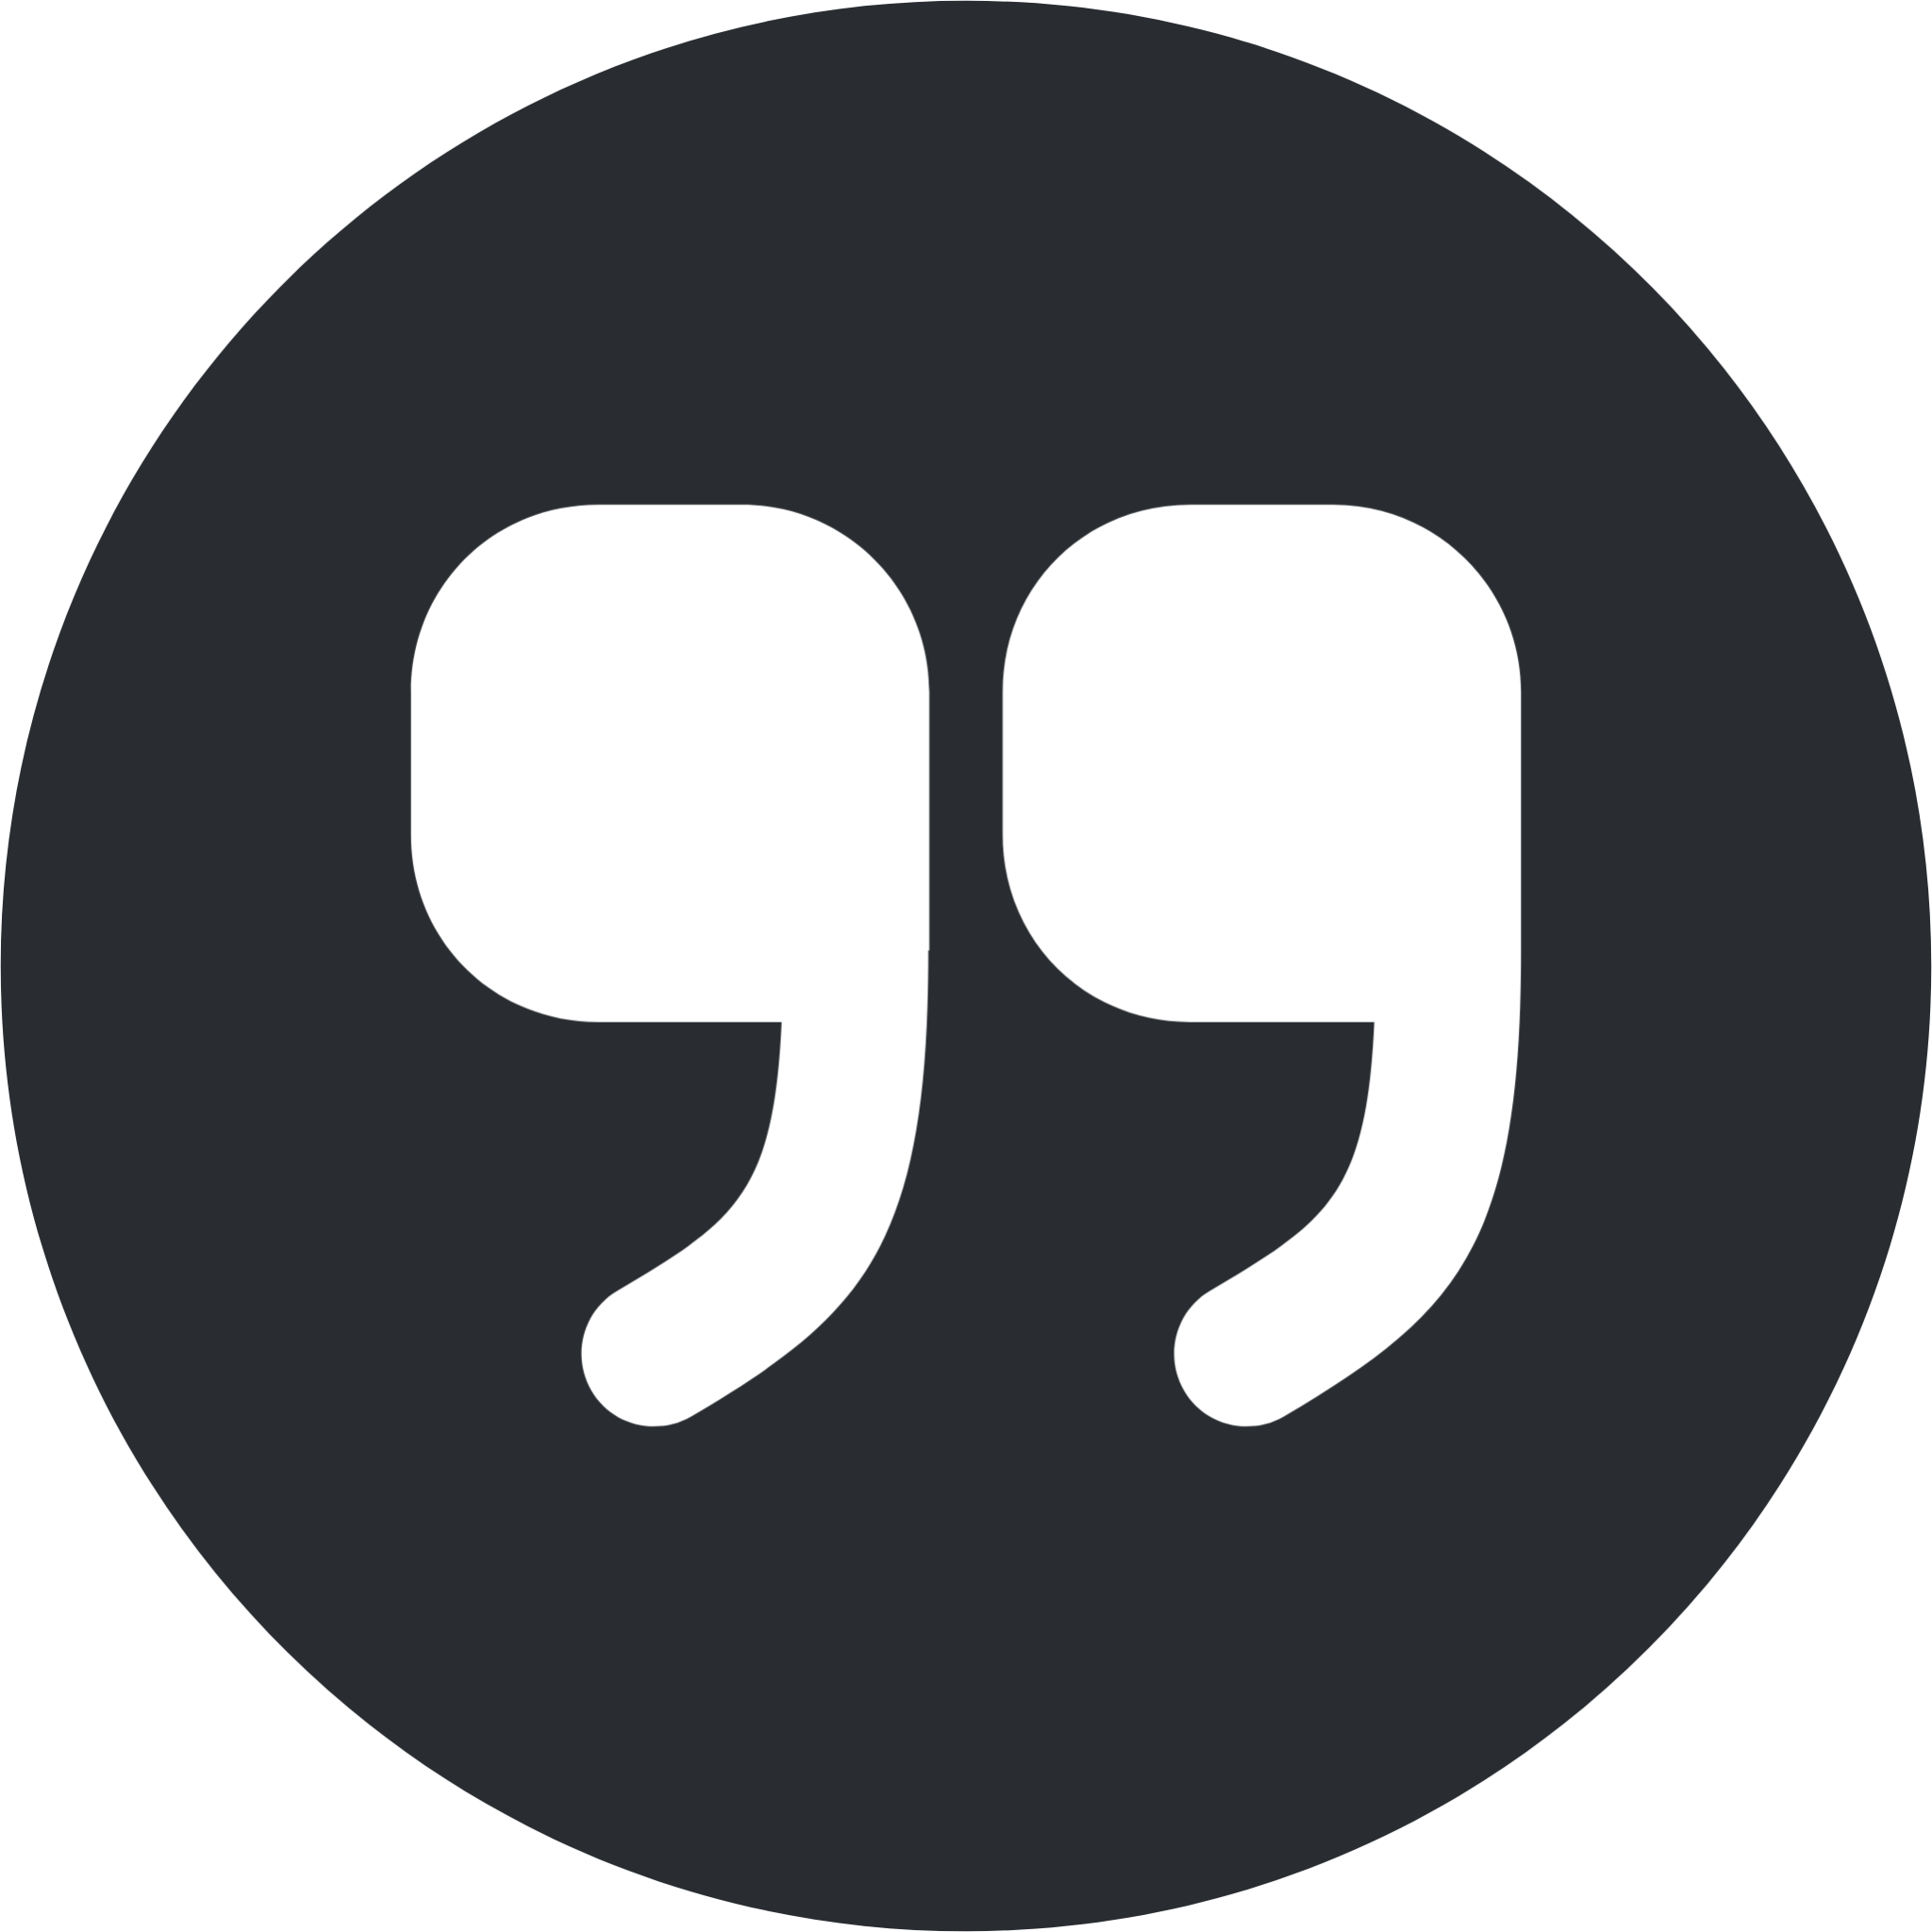 quote up circle icon